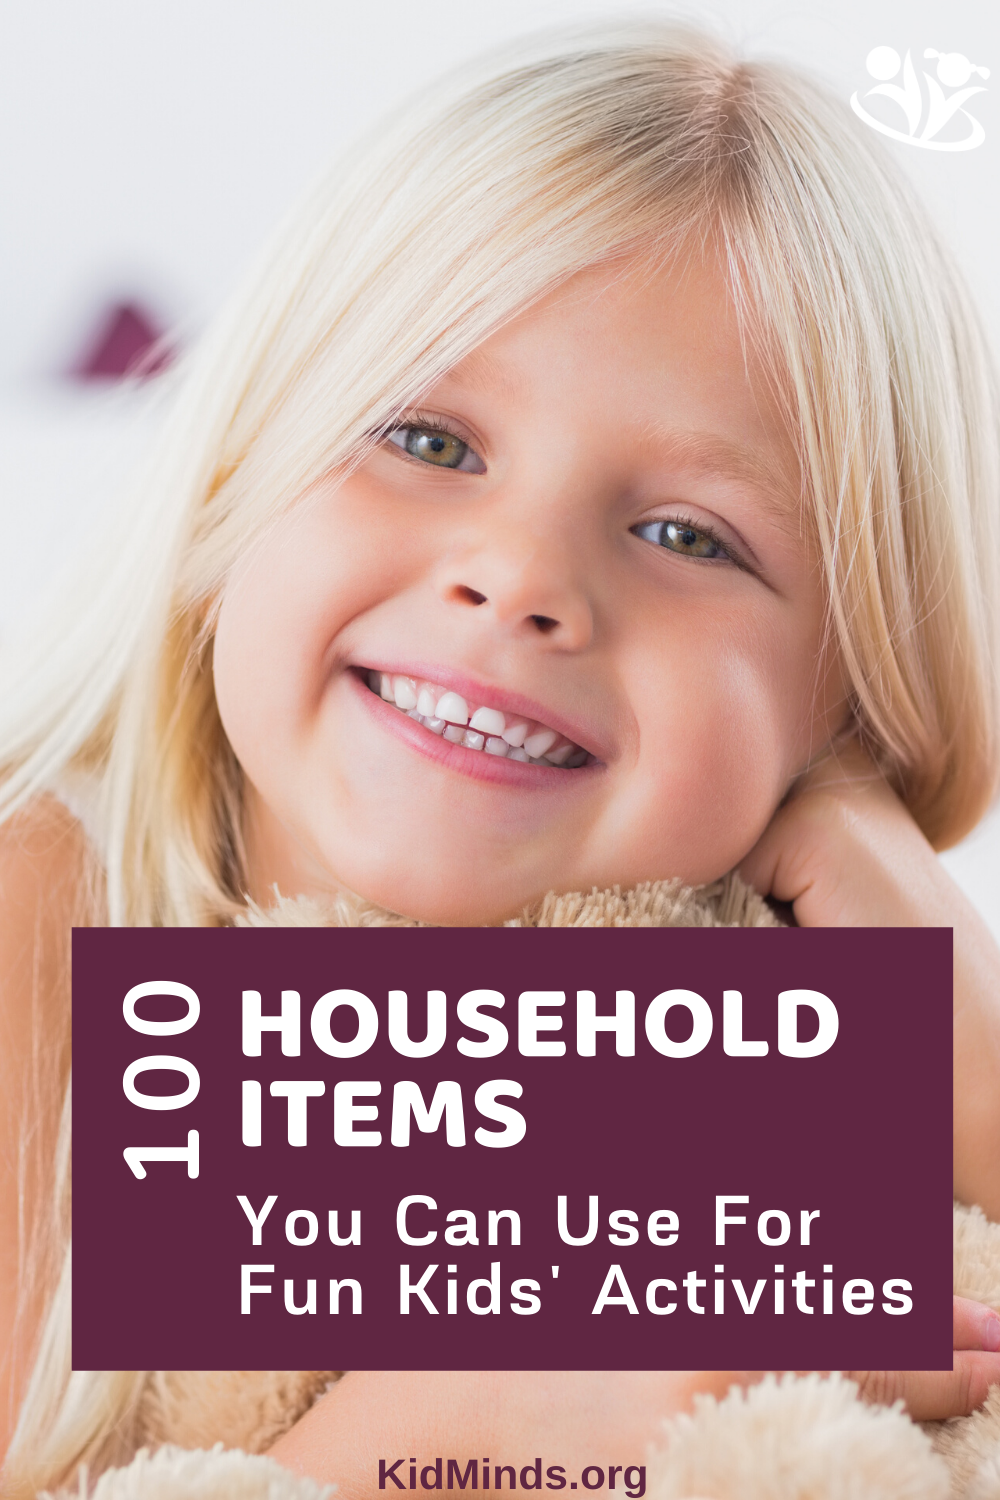 You won’t believe how many amazingly fun and educational kids’ activities you can set up using common household items! #funathomewithkids #earlylearning #handsonlearning #formoms #kitchenscience #STEAM #boredombusters